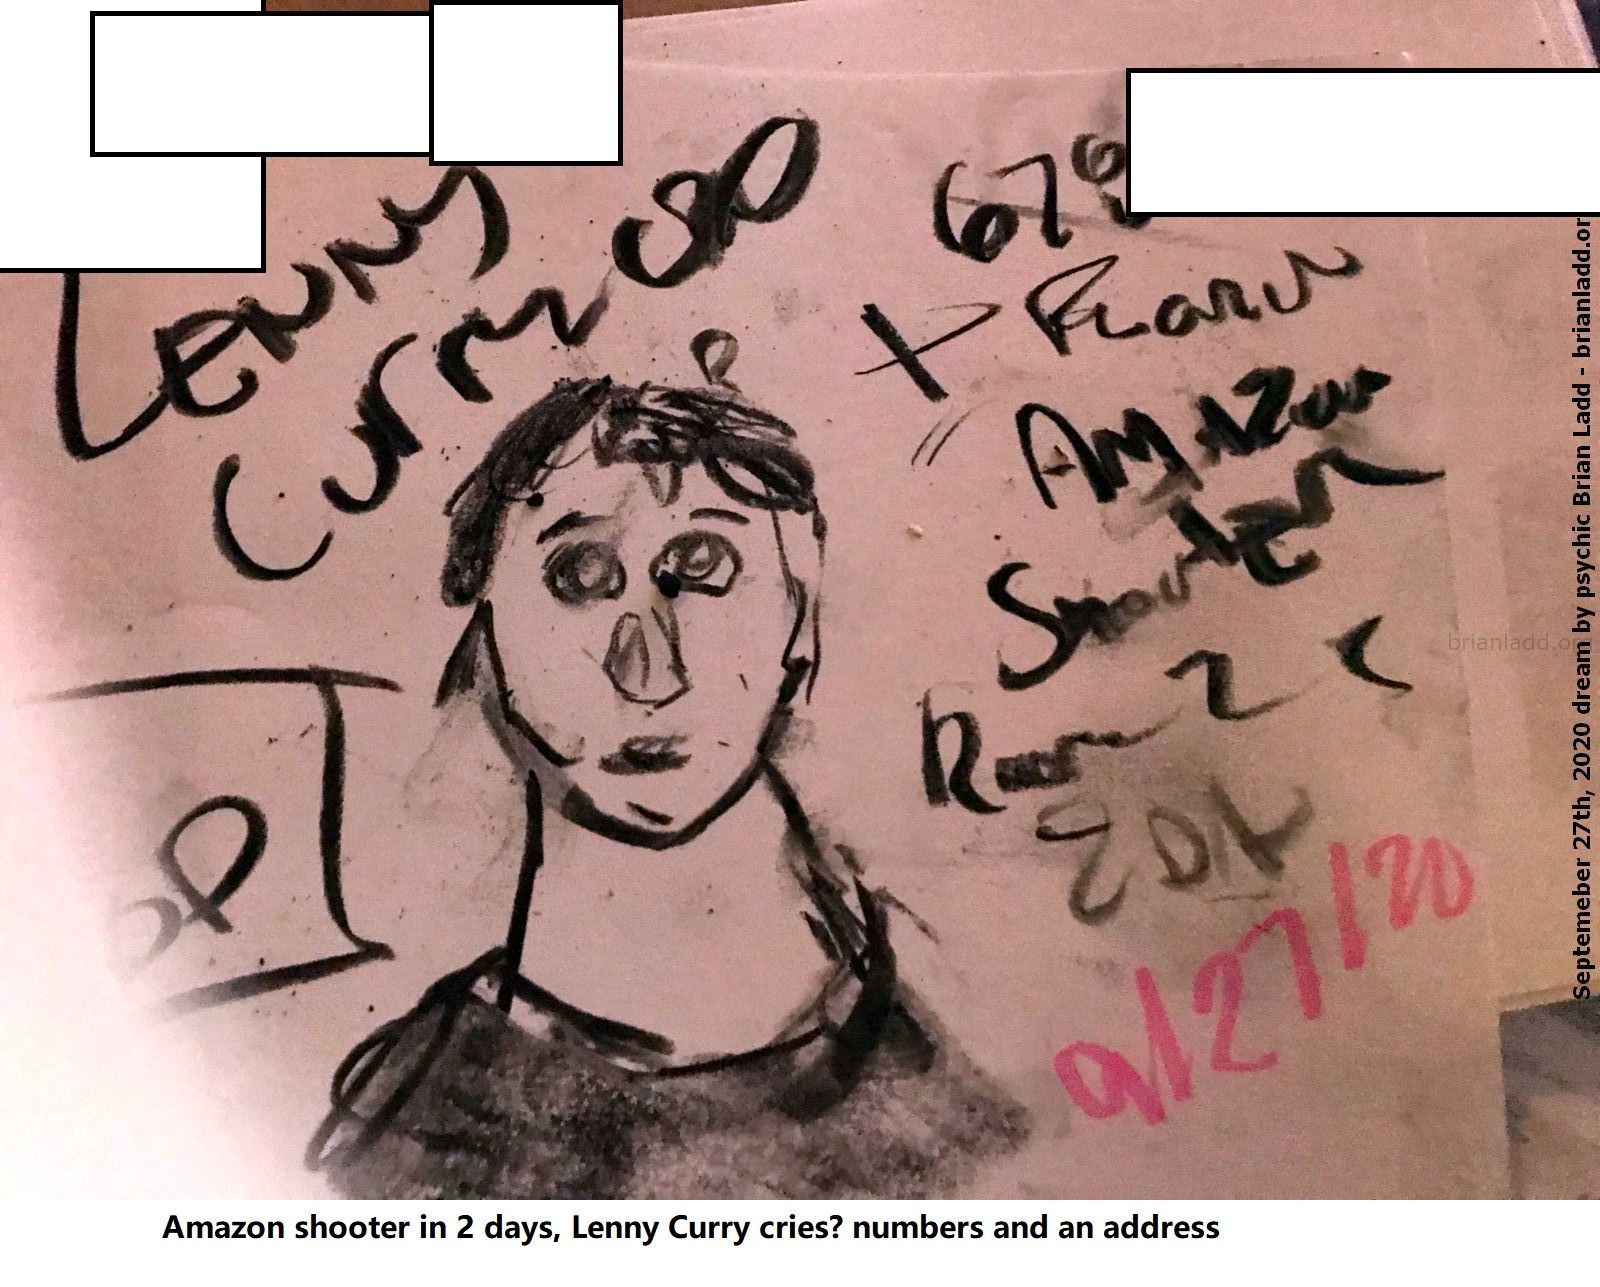 13713 27 September 2020 5 - Amazon Shooter In 2 Days, Lenny Curry Cries? Numbers And An Address....
Amazon Shooter In 2 Days, Lenny Curry Cries? Numbers And An Address.
